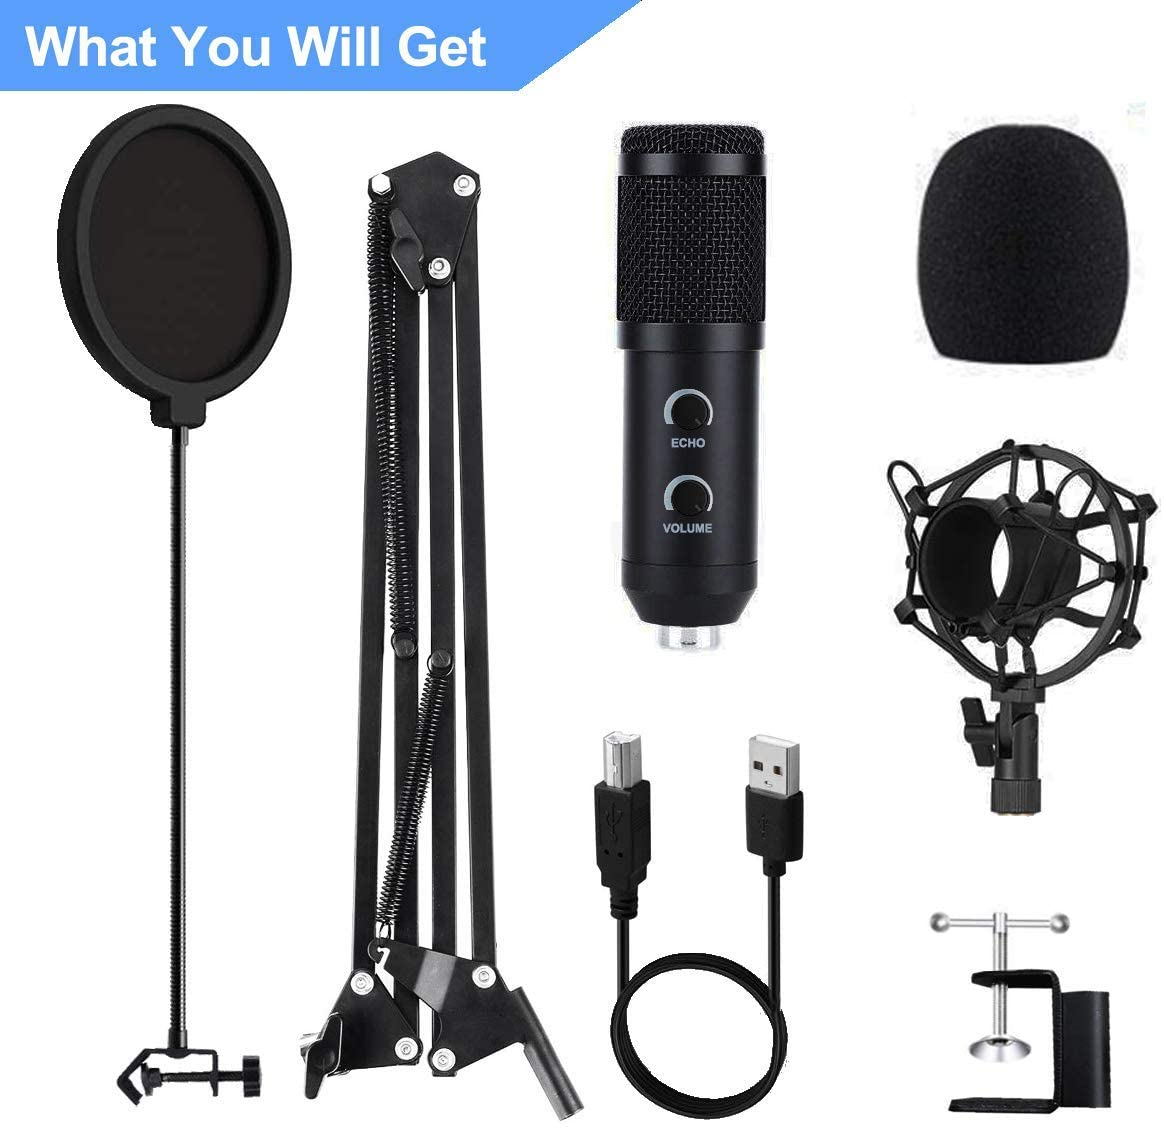 Upgraded USB Condenser Microphone